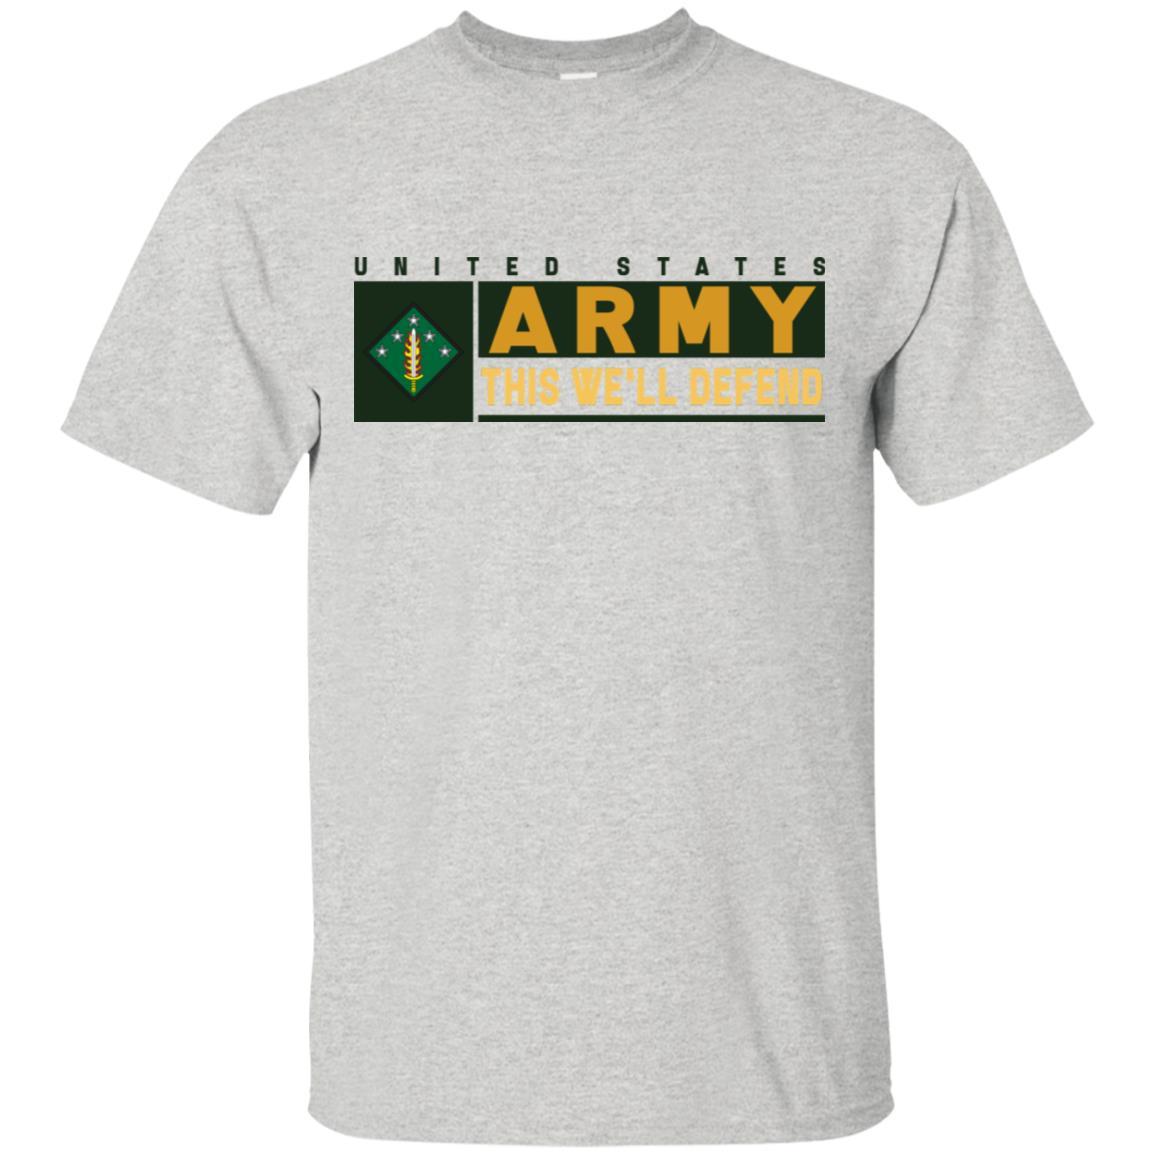 US Army 20TH SUPPORT COMMAND (CBRNE)- This We'll Defend T-Shirt On Front For Men-TShirt-Army-Veterans Nation